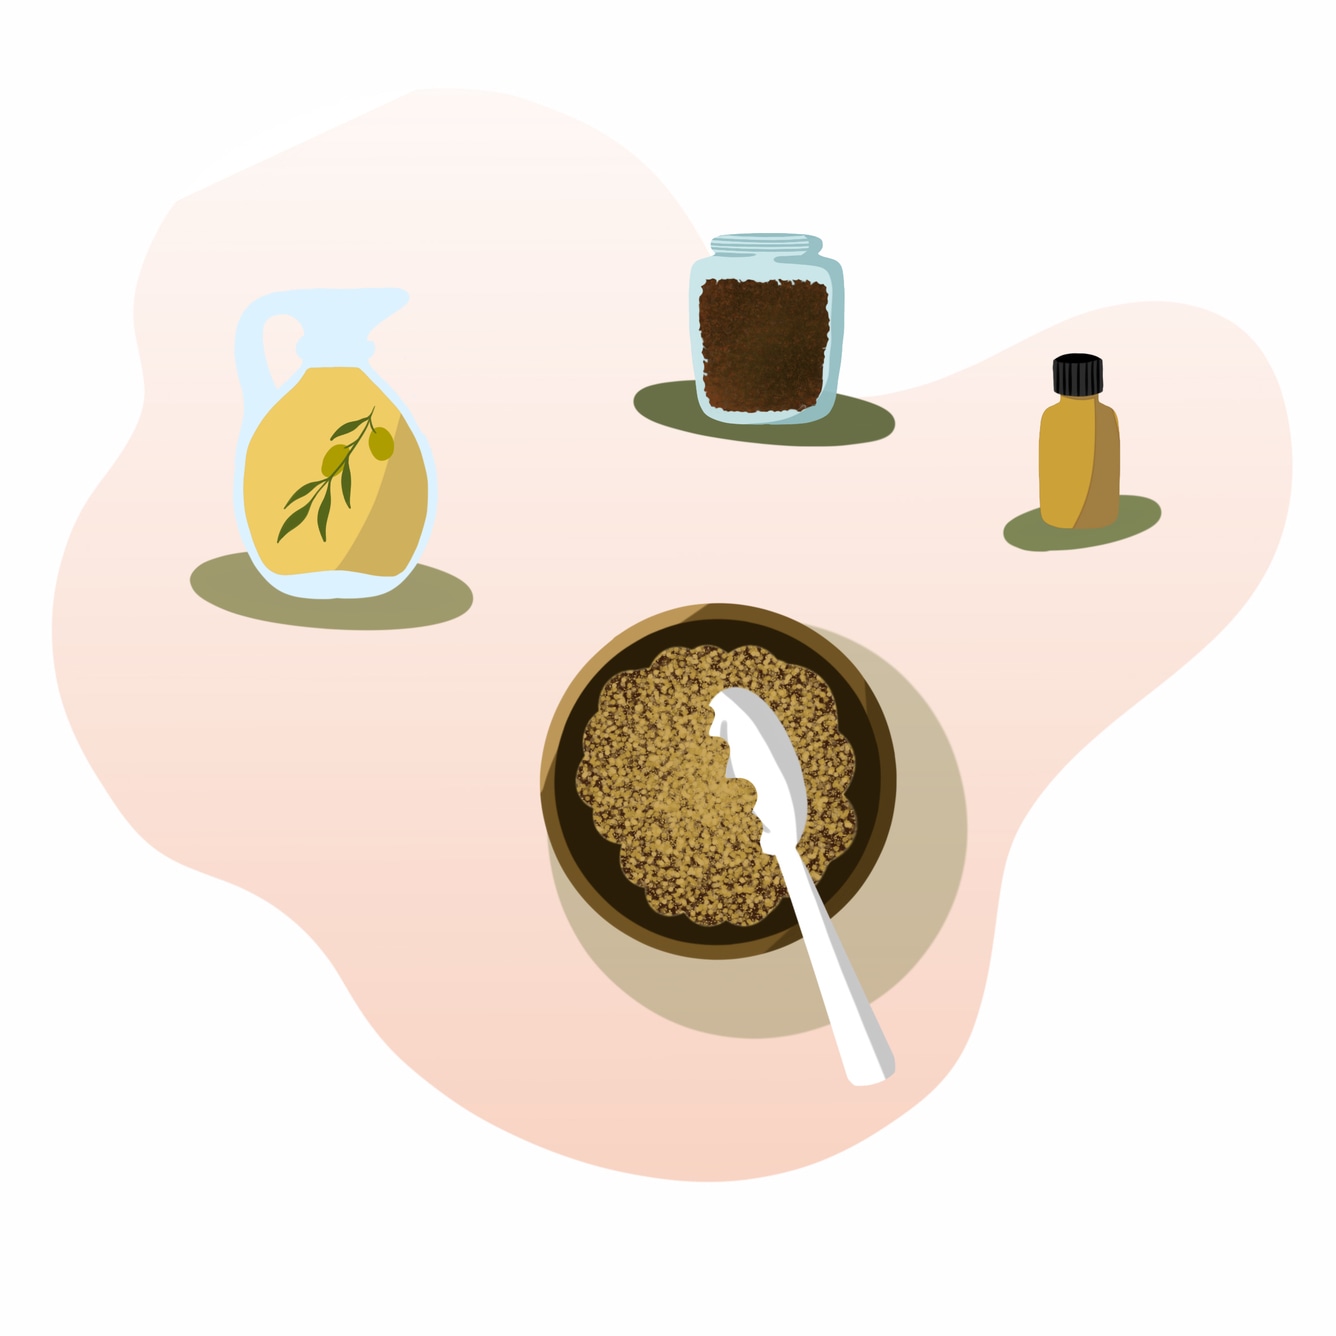 Illustration of ingredients for coffee & olive oil homemade body scrub